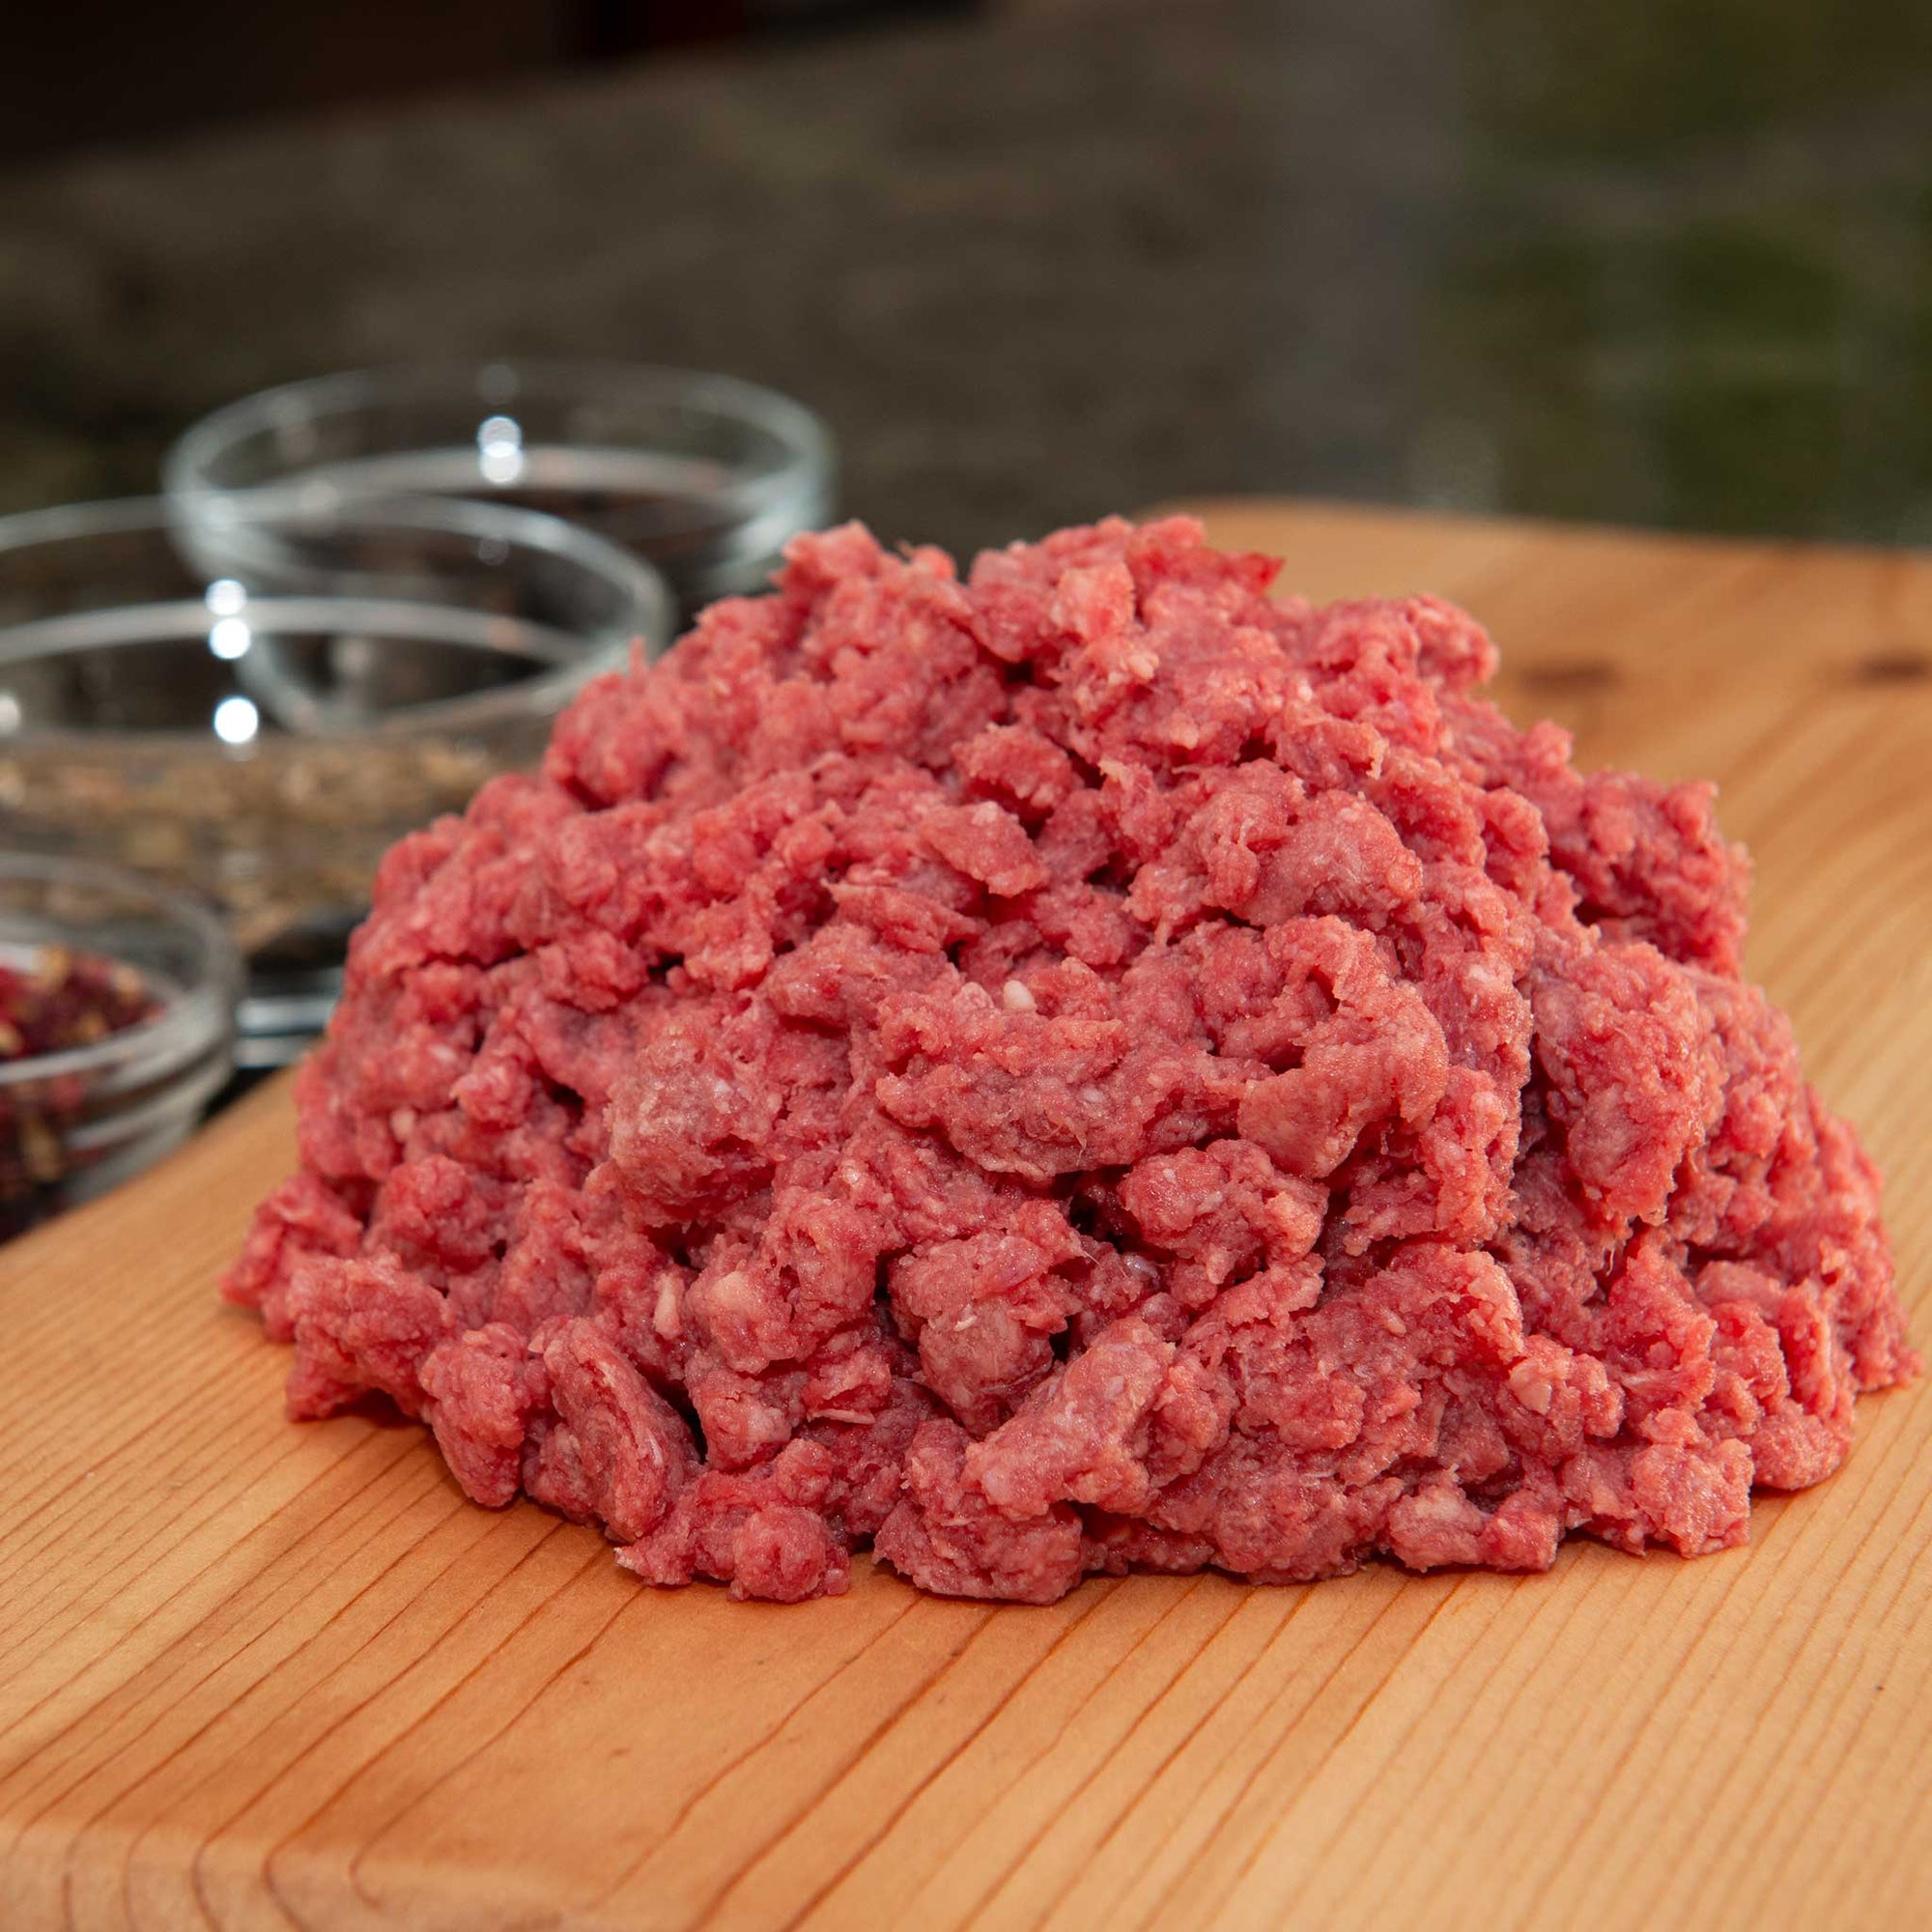 100% Grassfed Local Ground Beef and Burger Patties